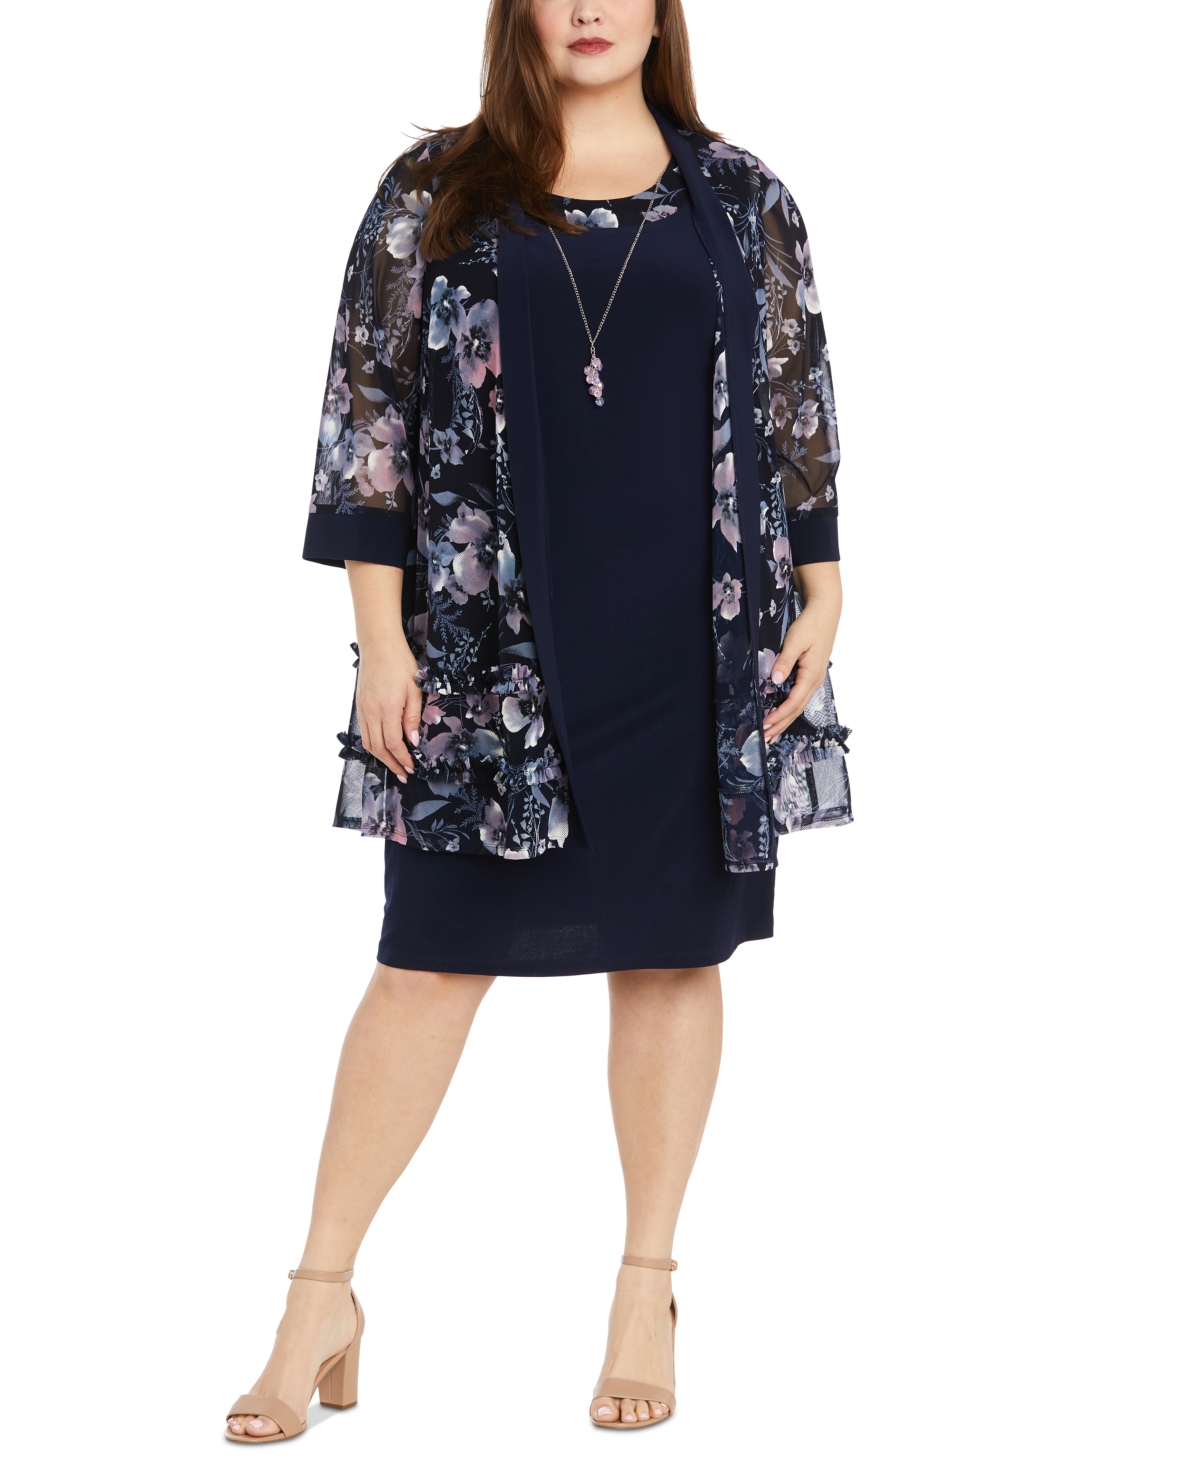 Plus Size Floral Mesh Jacket and Contrast-Trim Sleeveless Dress - Navy/pink